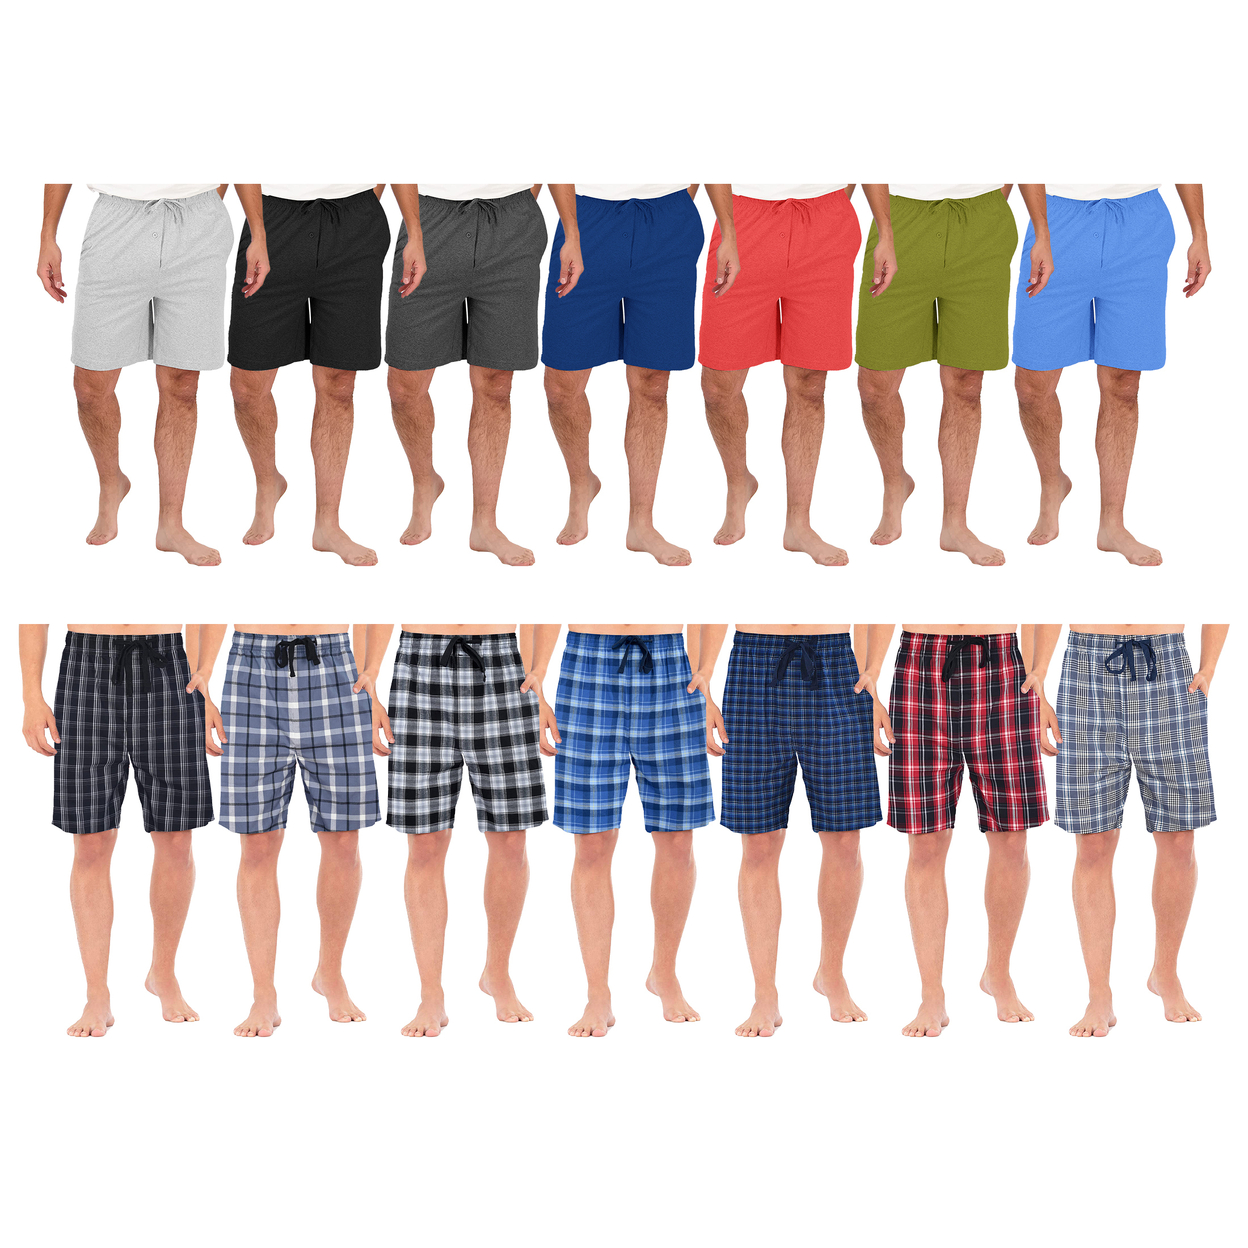 Multi-Pack: Men's Ultra Soft Knit Lounge Pajama Sleep Shorts - Solid, 3-pack, Small